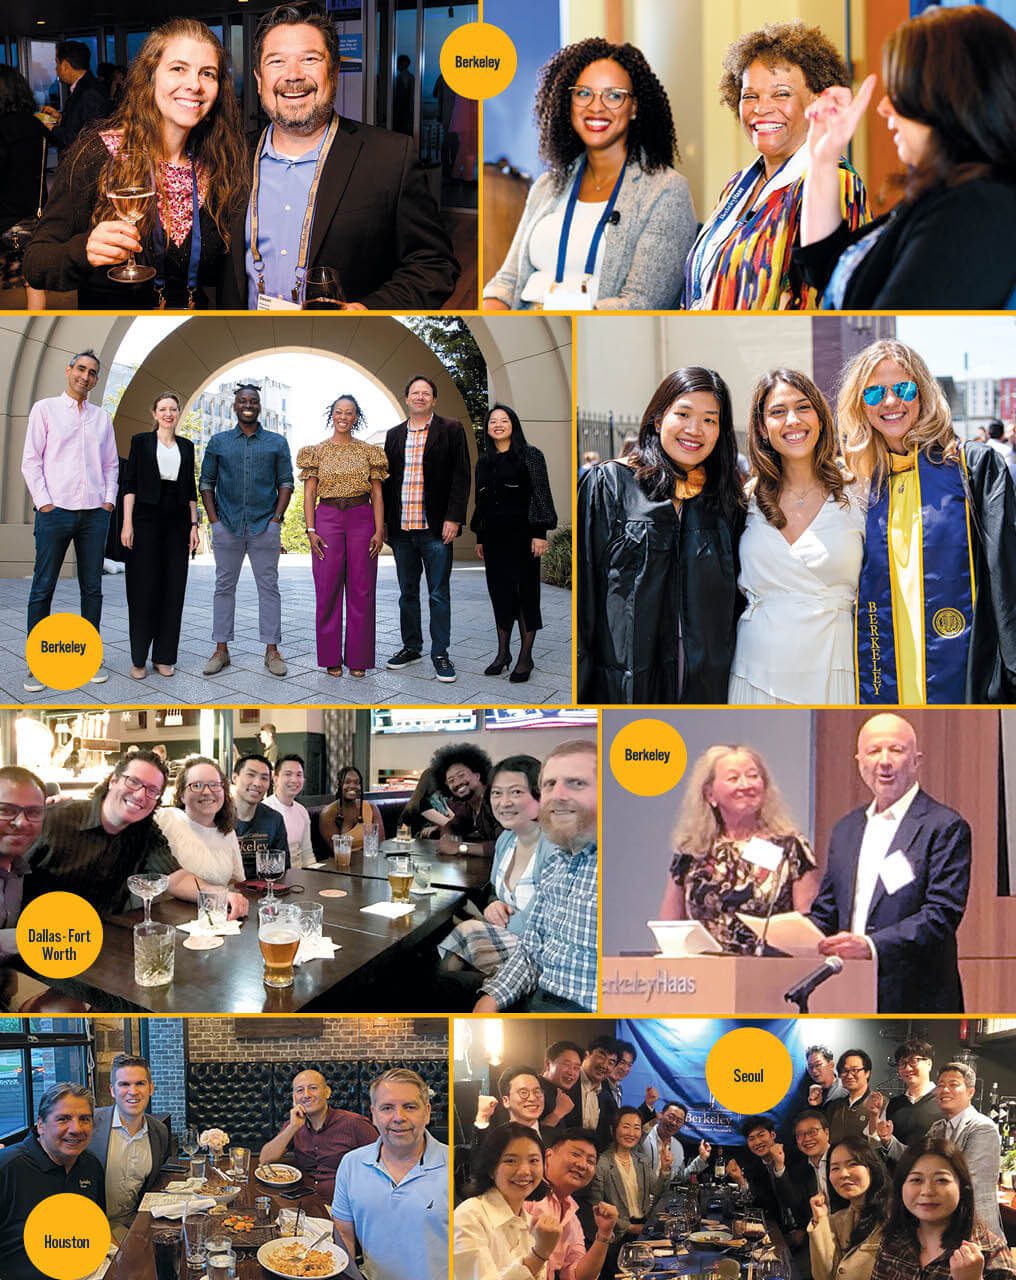 An assortment of images showing alumni events.